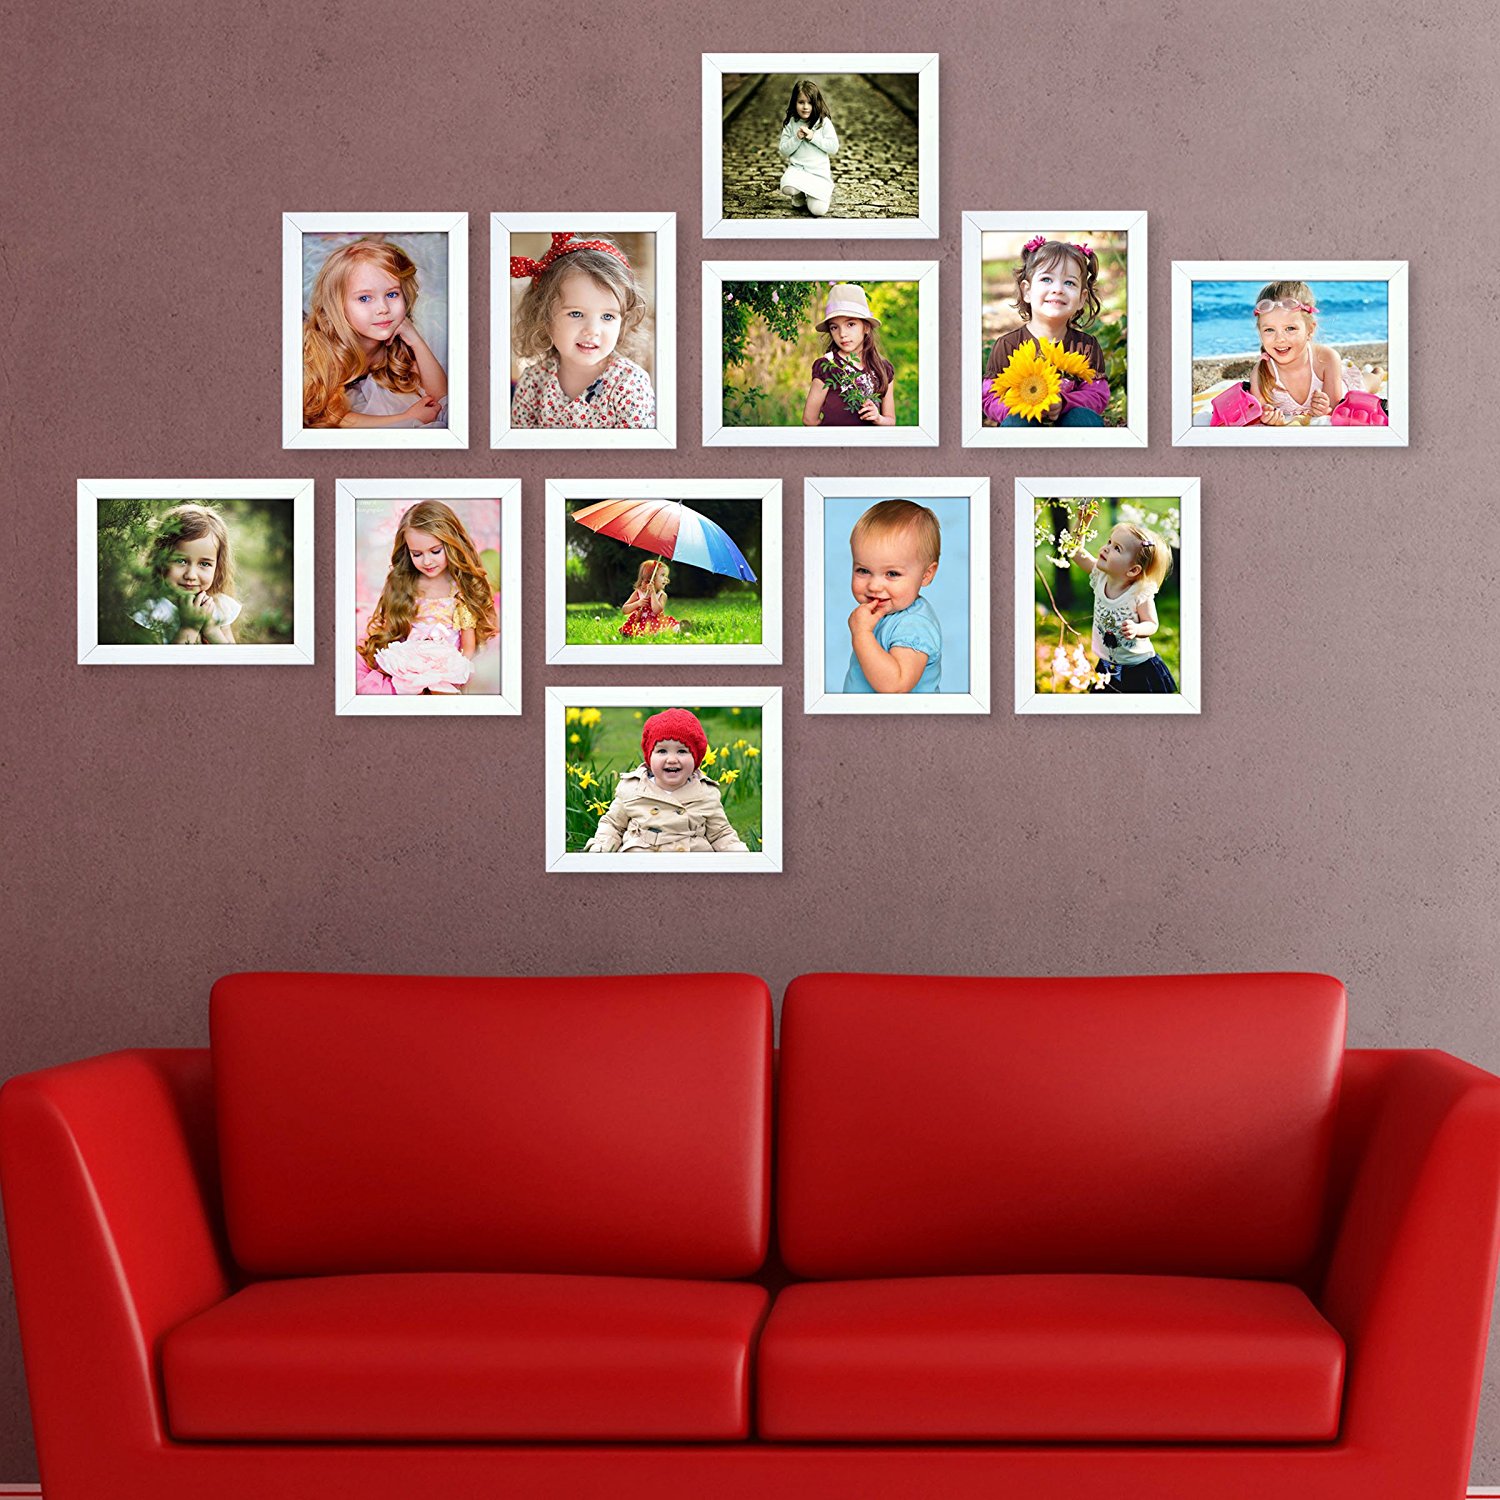 White Collage Picture Frames - www.inf-inet.com